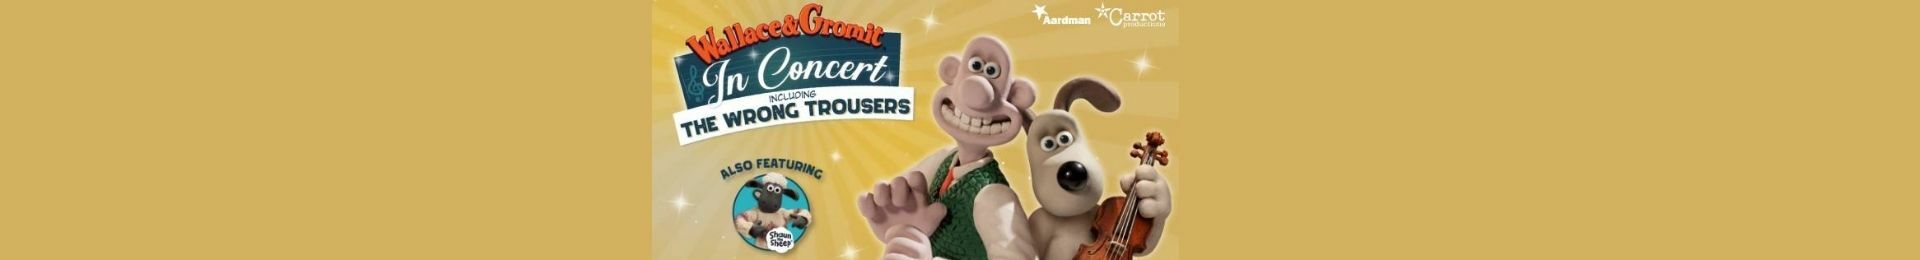 Wallace and Gromit: In Concert banner image